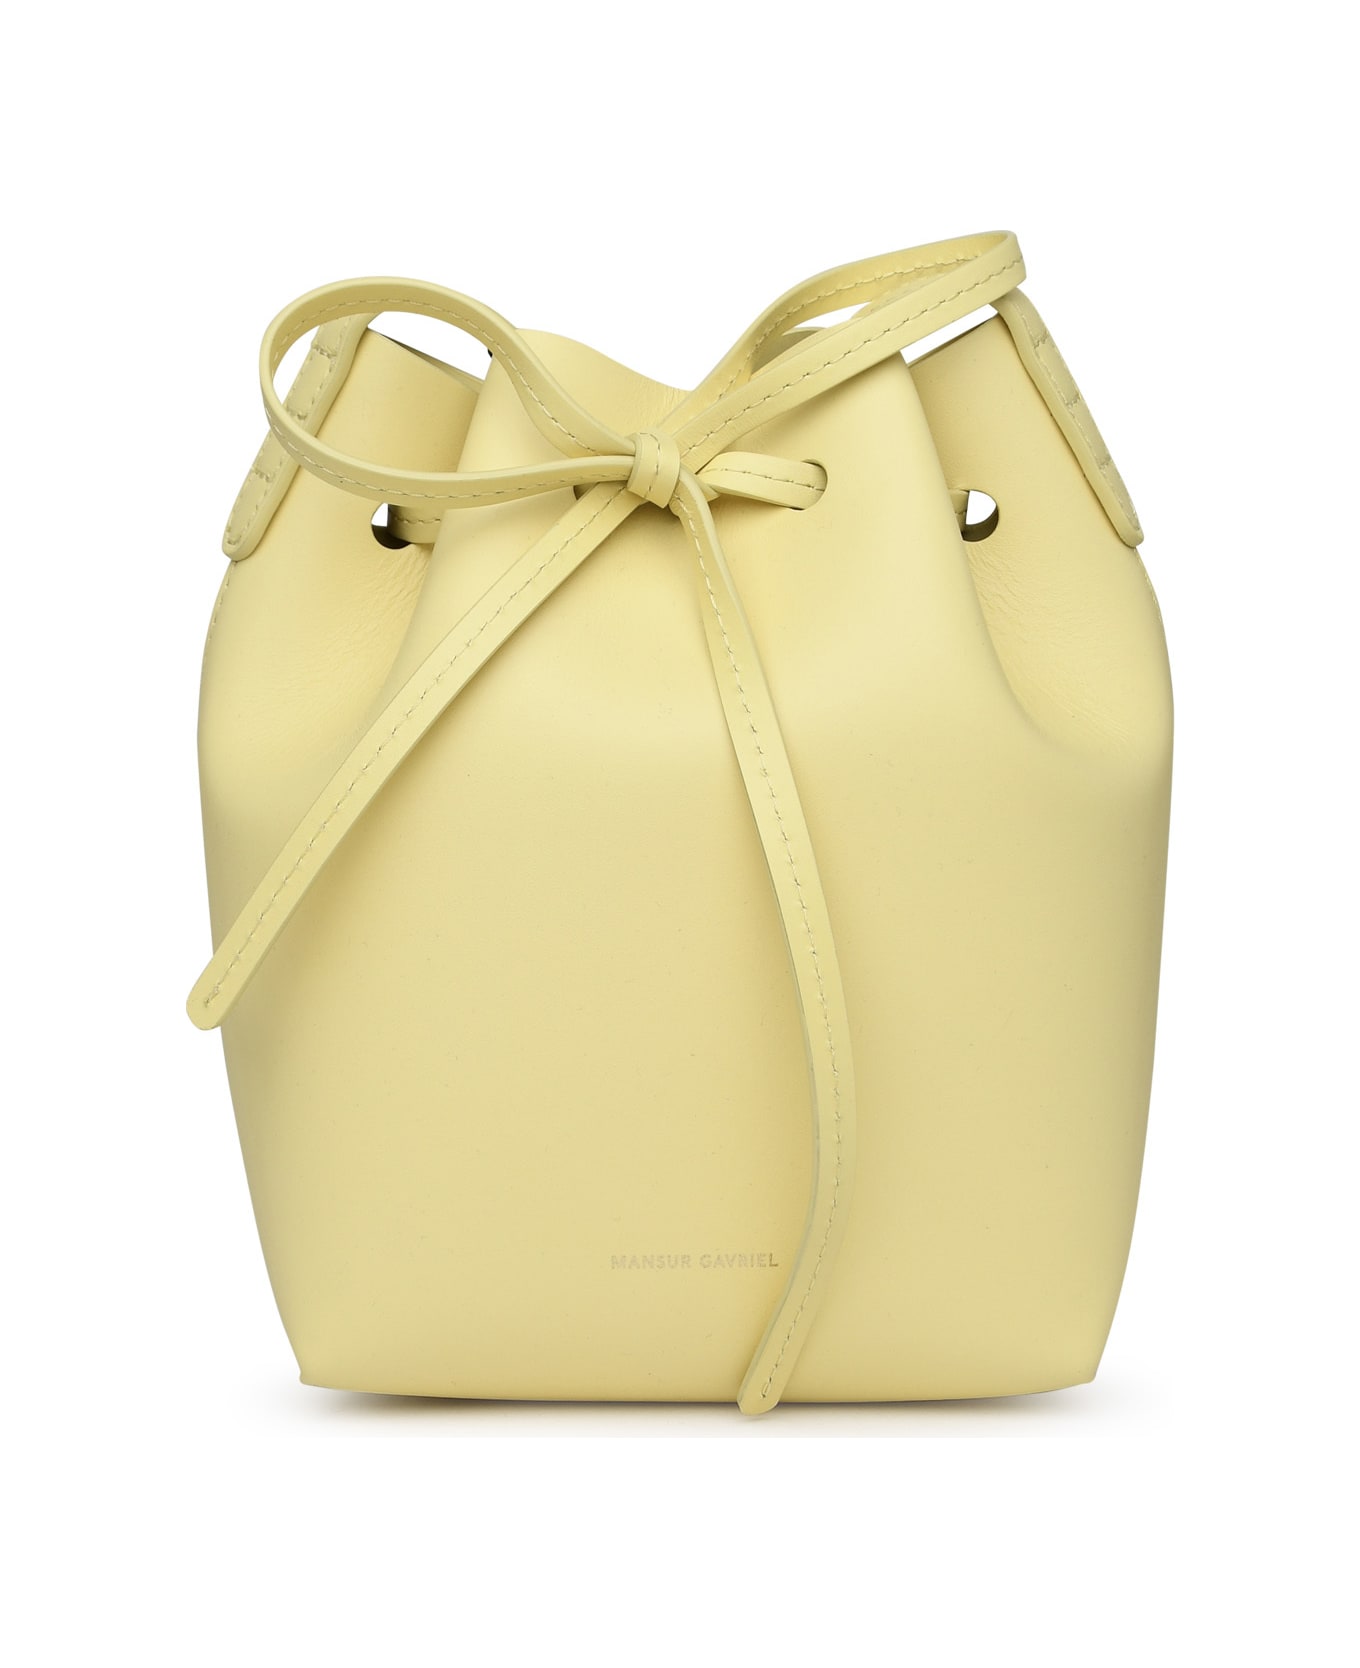 Mansur Gavriel Small Bucket Bag In Yellow Leather - Yellow